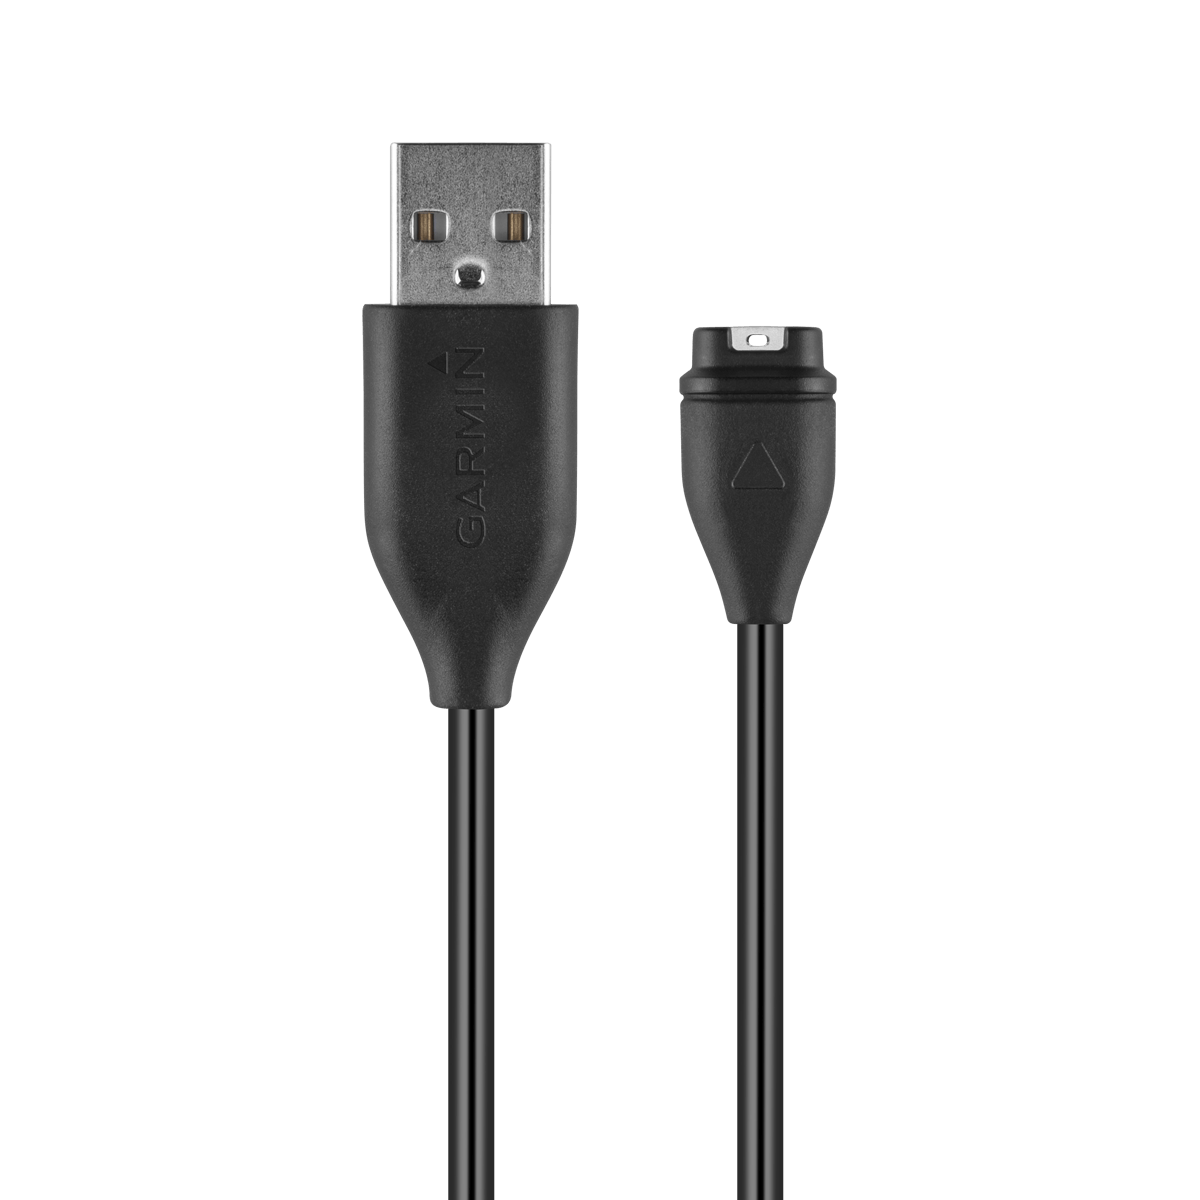 Stay Organized with Adreama Charging/Data Cable for Multiple Garmin Devices